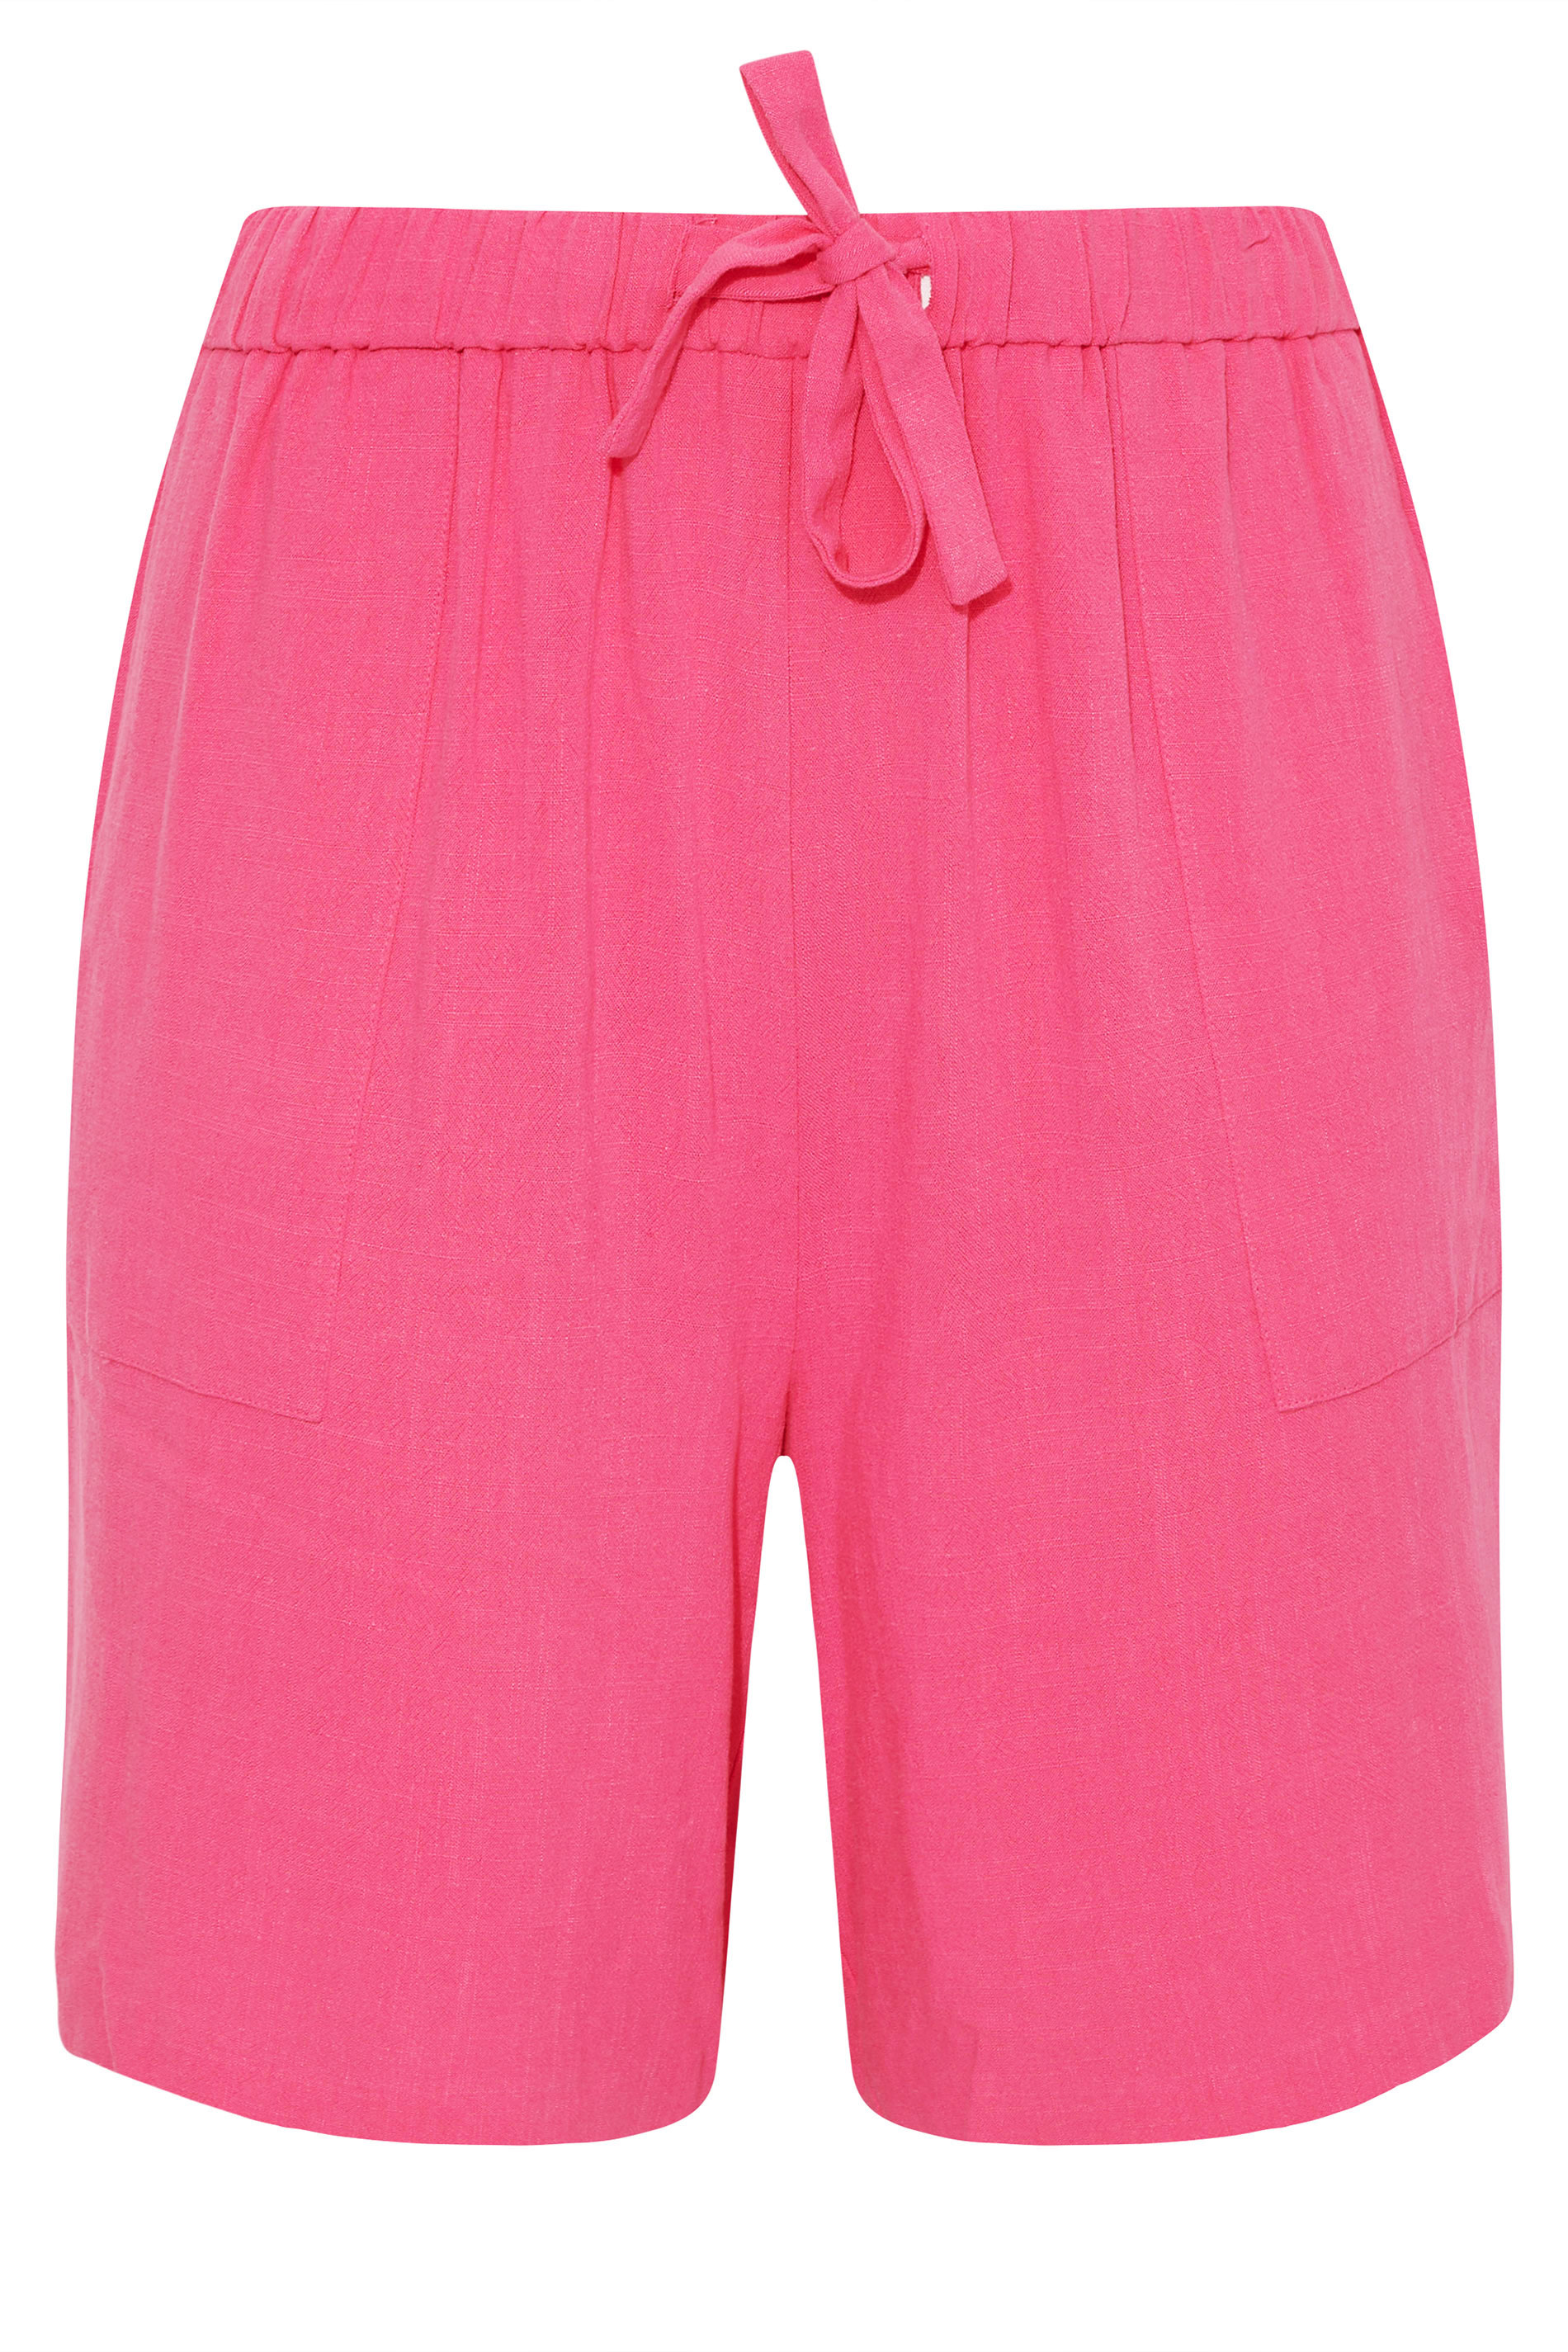 Plus Size Hot Pink Linen Shorts | Yours Clothing